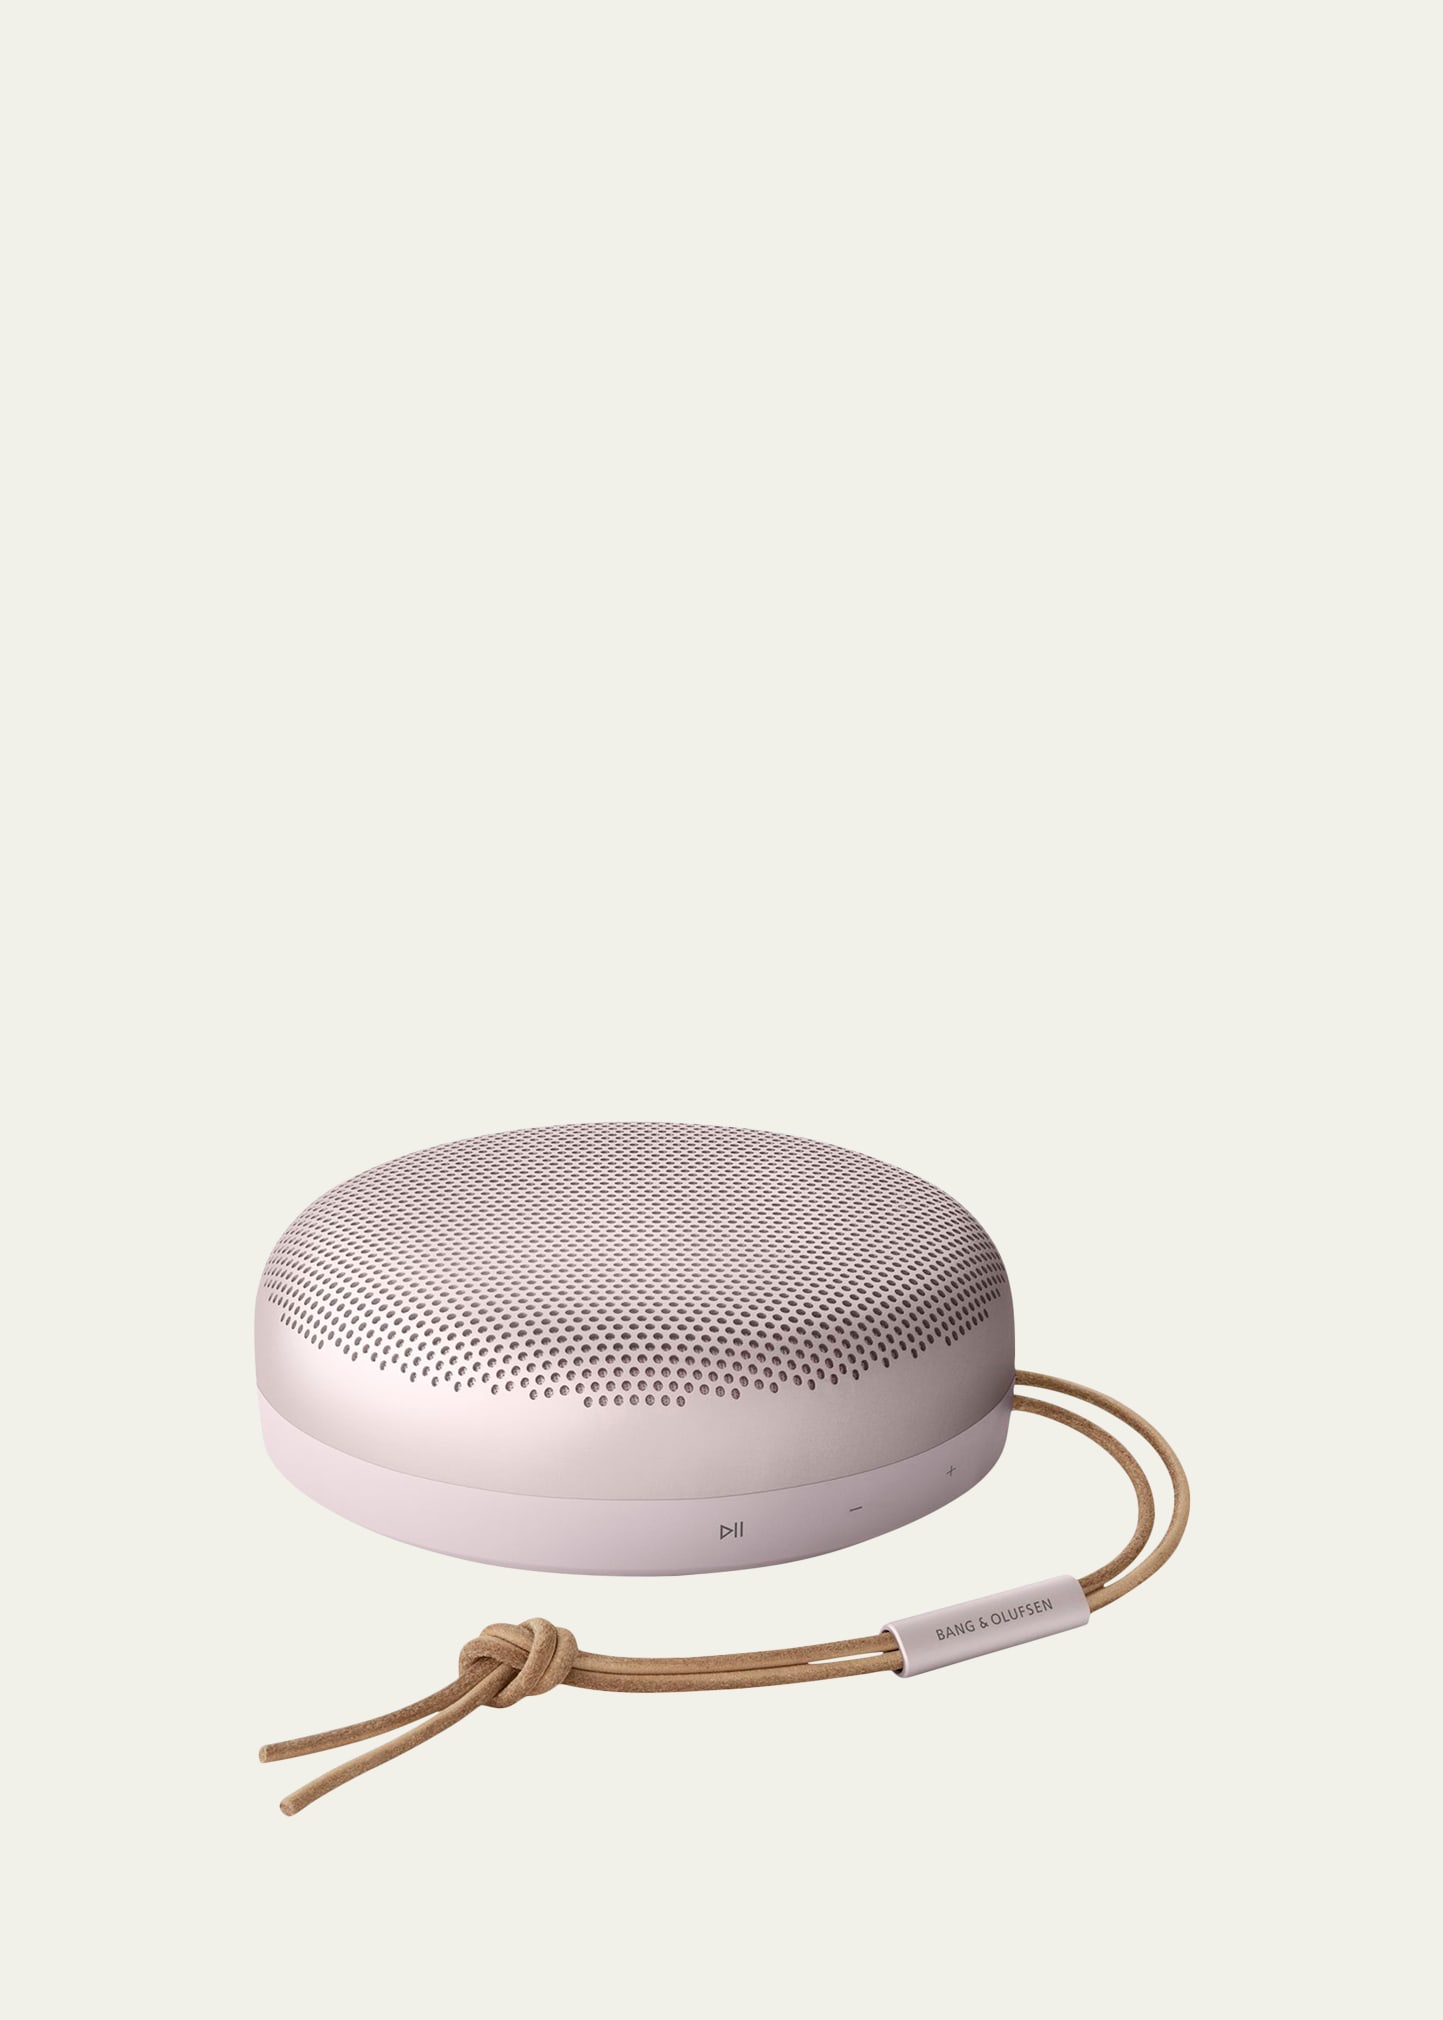 BeoPlay A1 2nd Generation Speaker, Pink